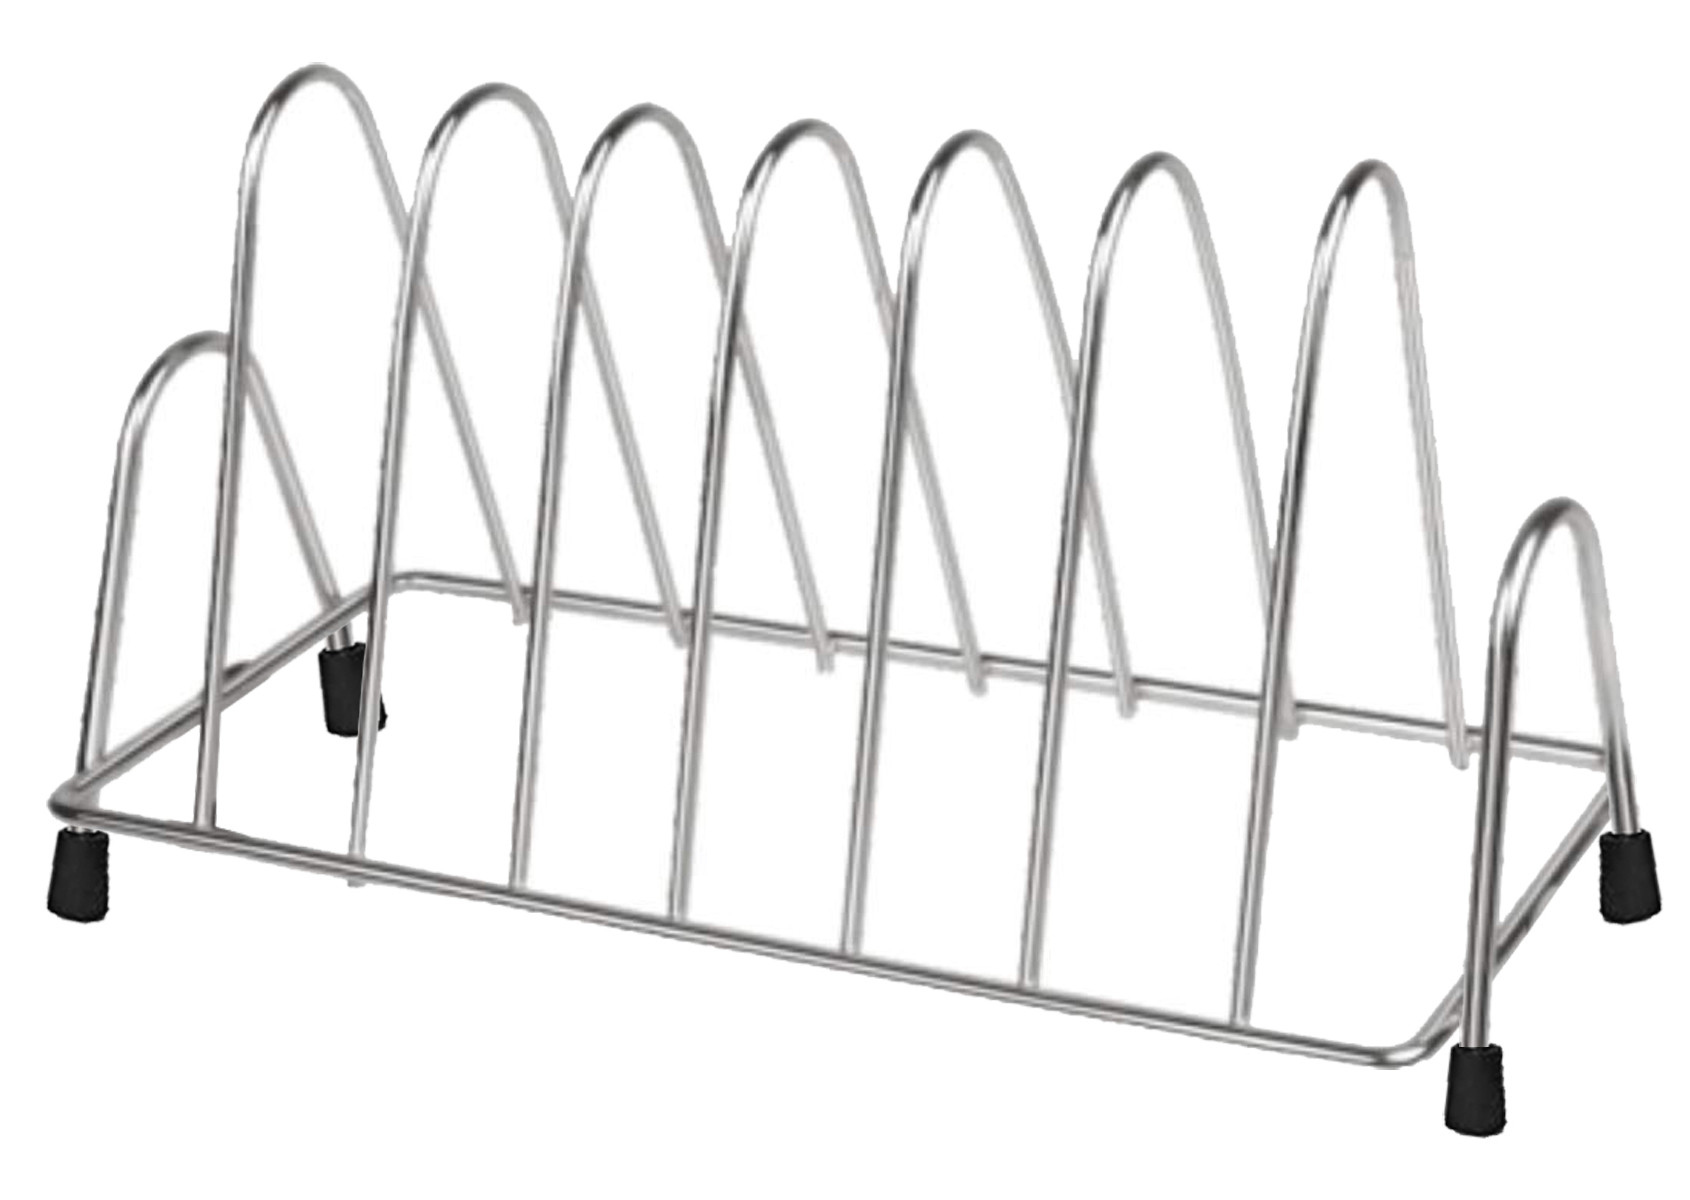 Kuber Industries Stainless Steel Plate Rack/Dish Rack/Plate Stand/Dish Stand/Lid Holder Utensil Rack for Kitchen-6 Sections with Anti-Rust Nano Coating(Silver)